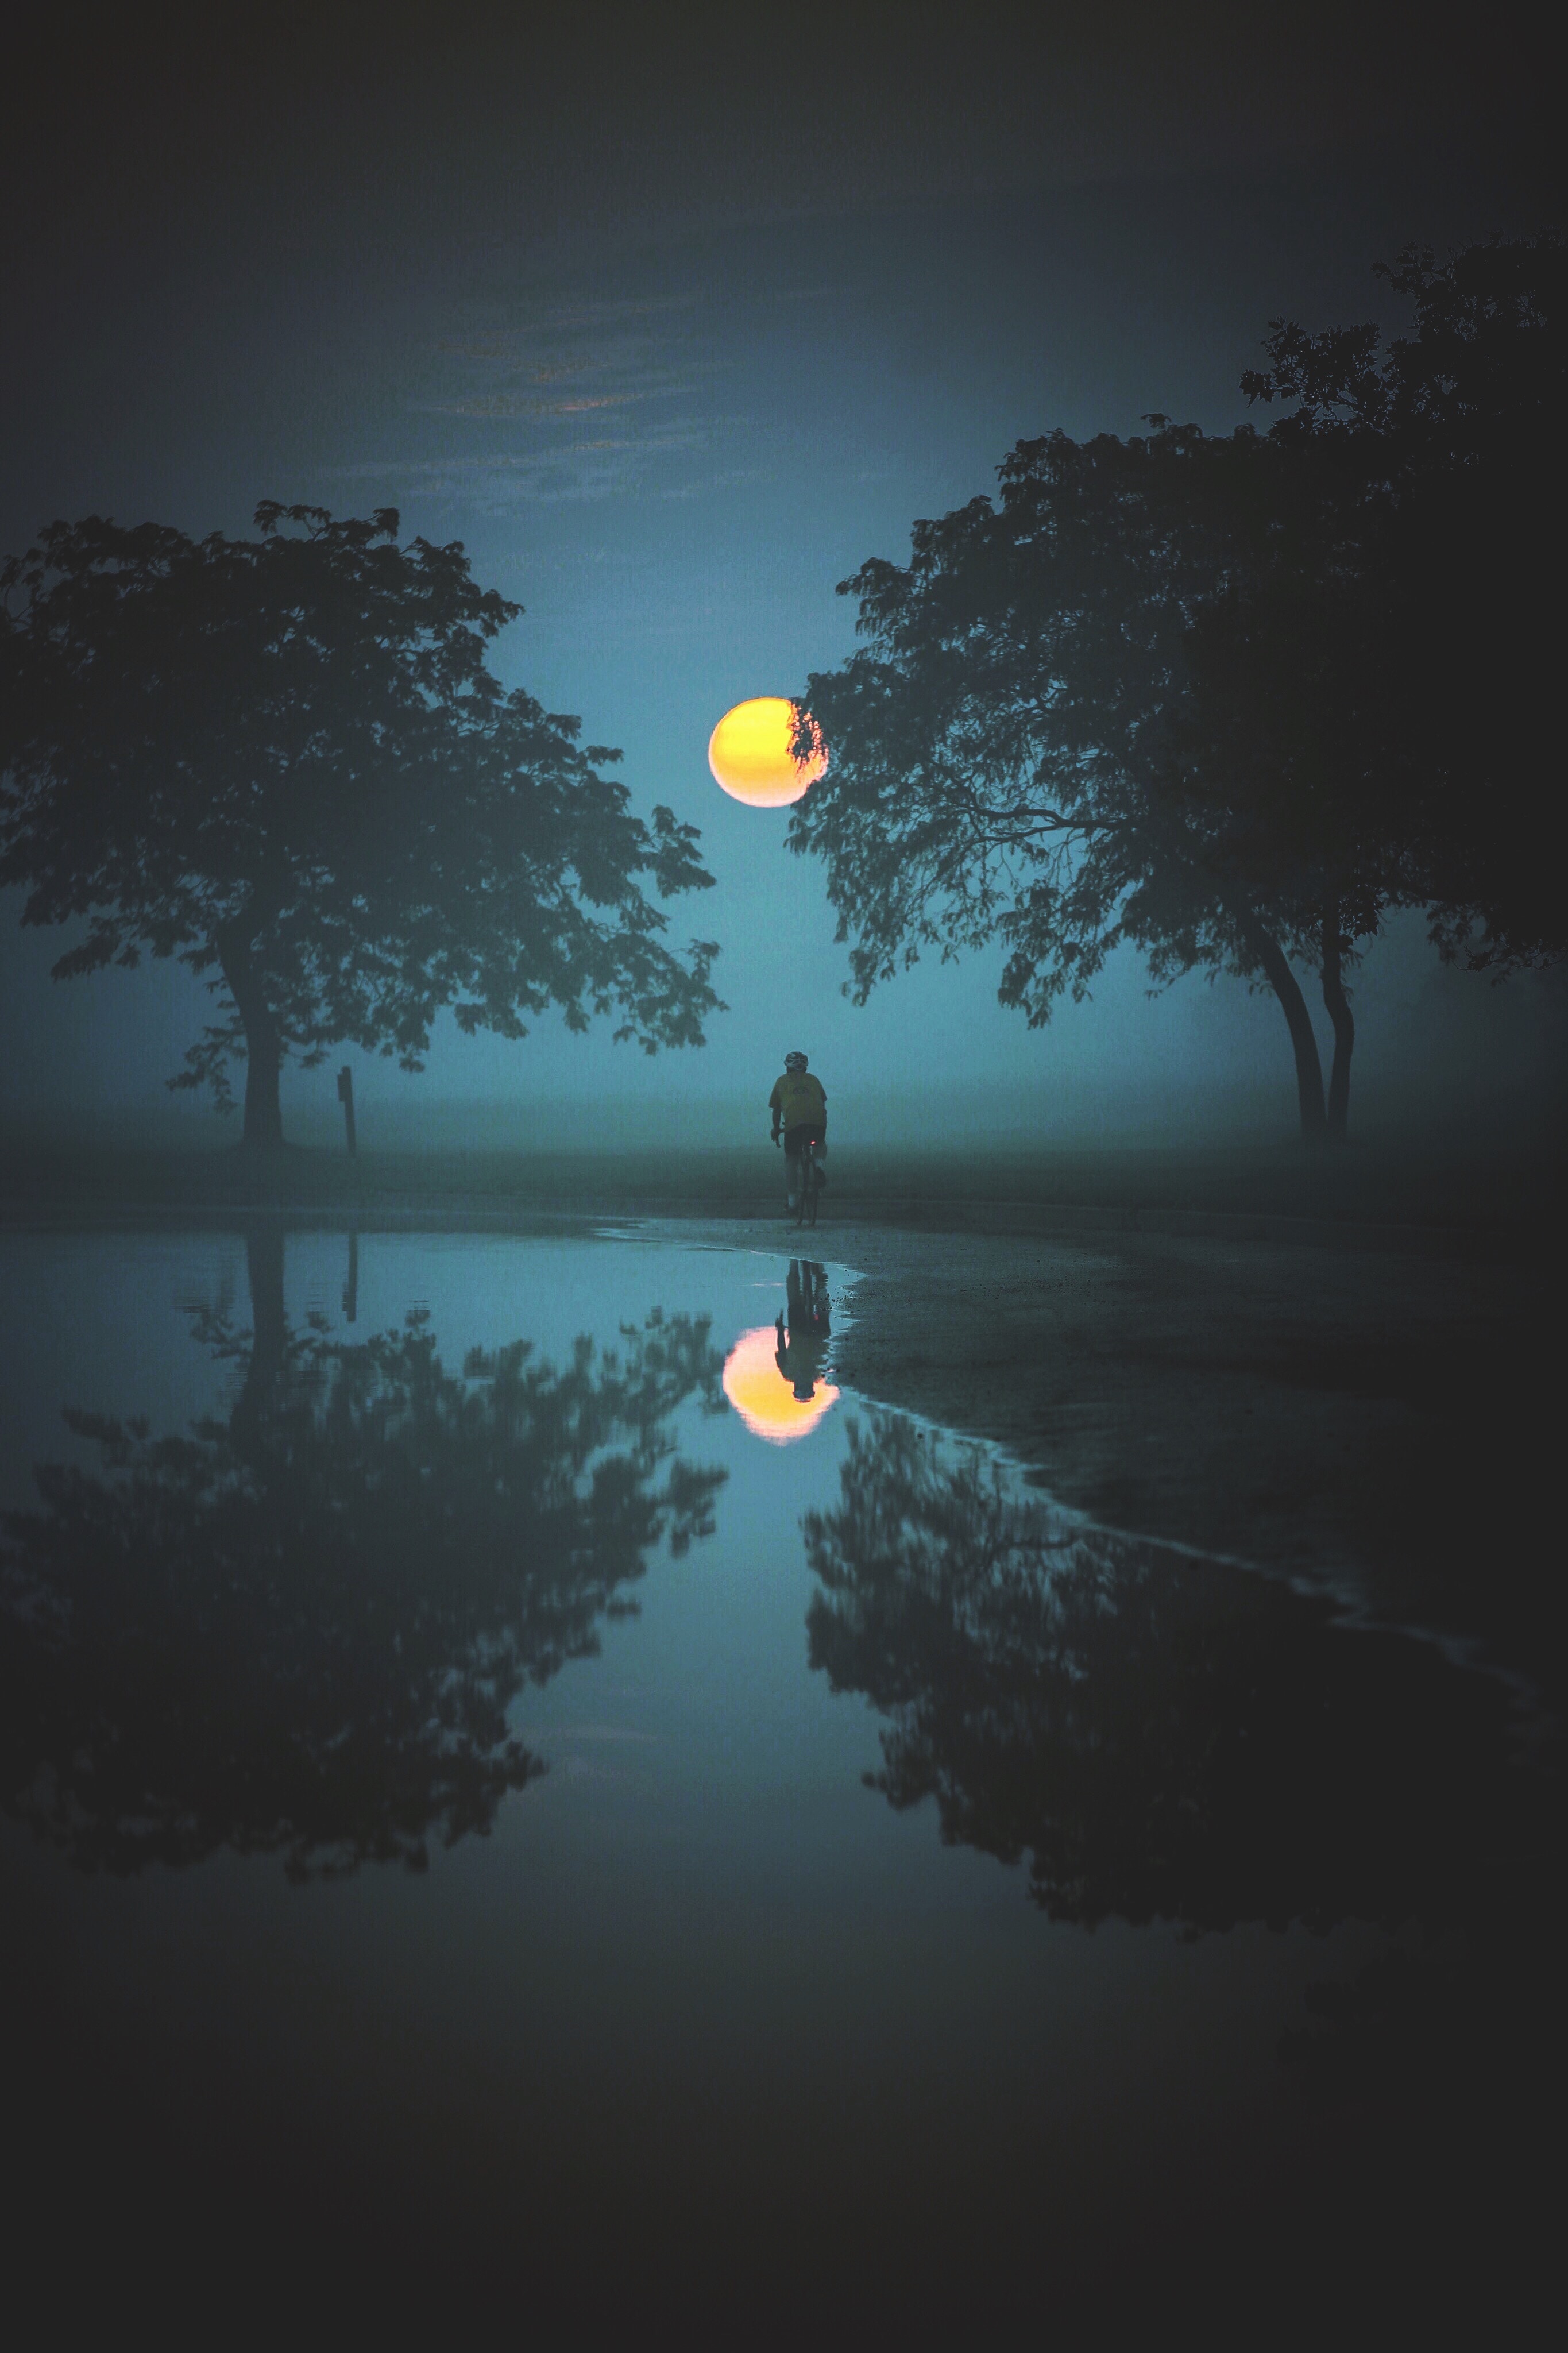 reflection, moon, cyclist, nature, water, trees, fog iphone wallpaper